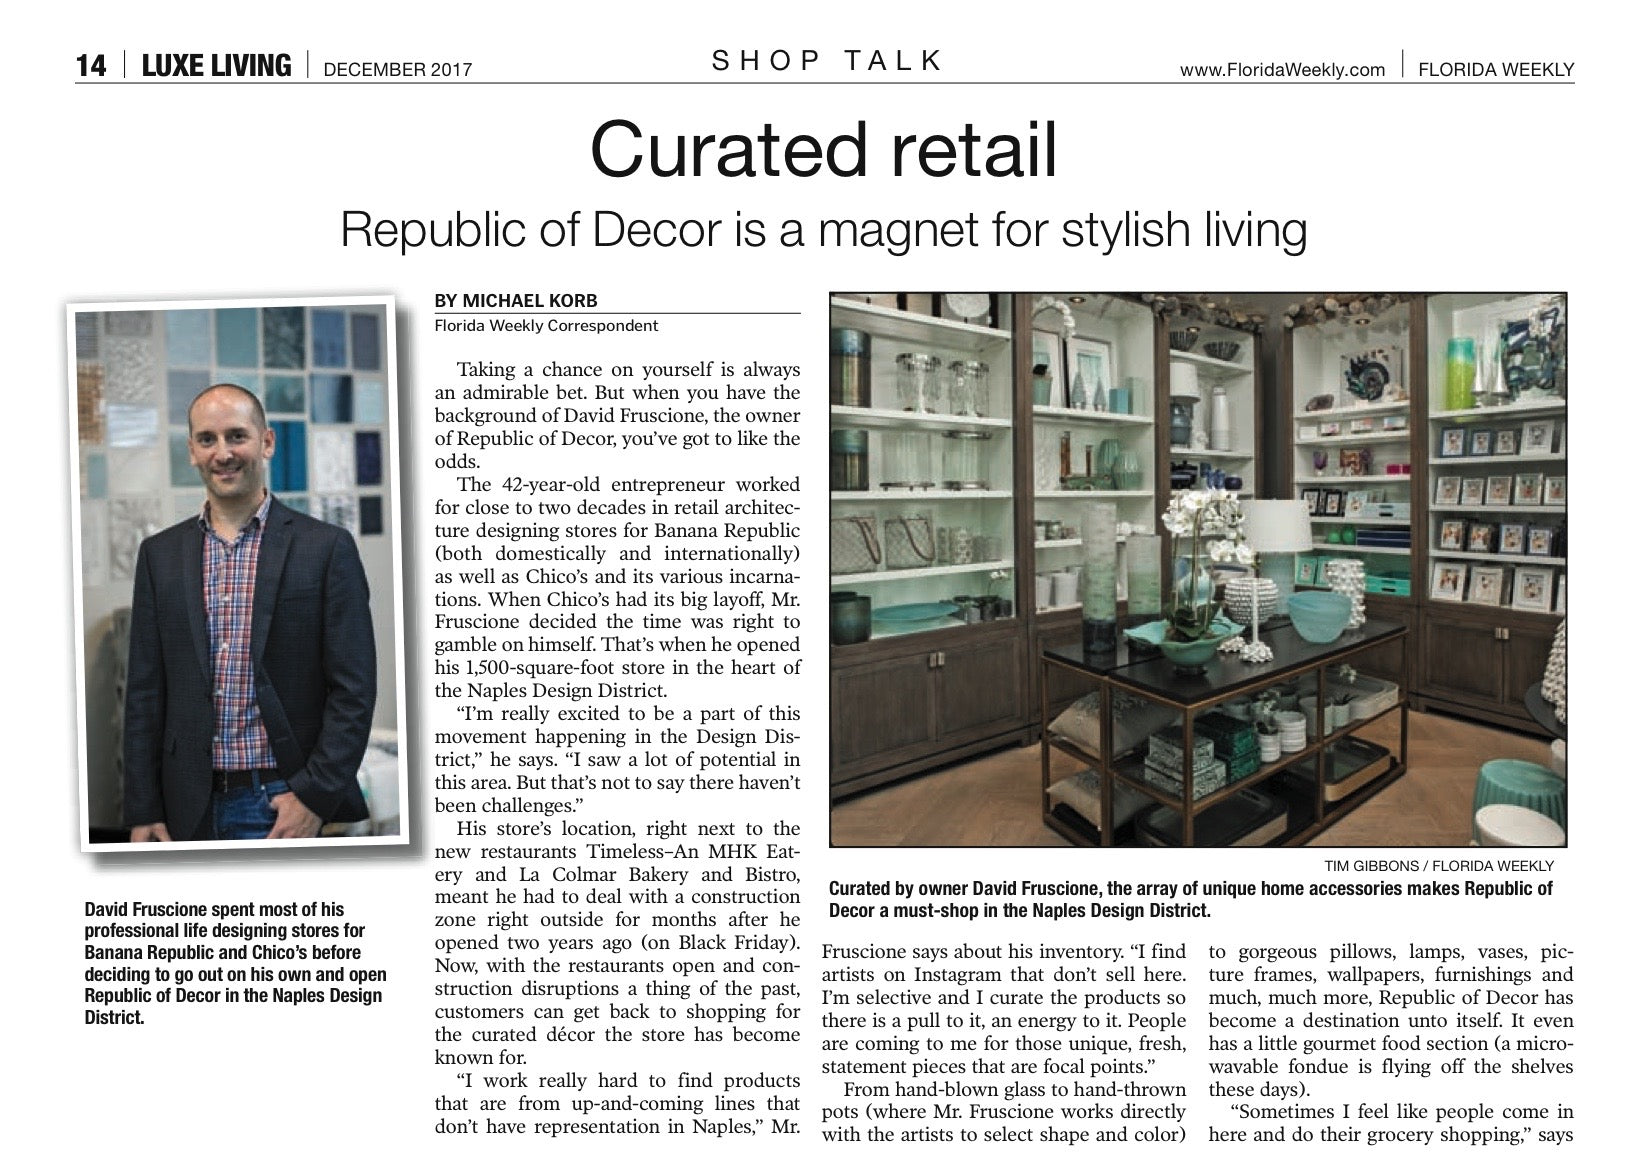 David Fruscione, owner of Republic of Decor and interior designer in Naples, Florida, is featured in Florida Weekly